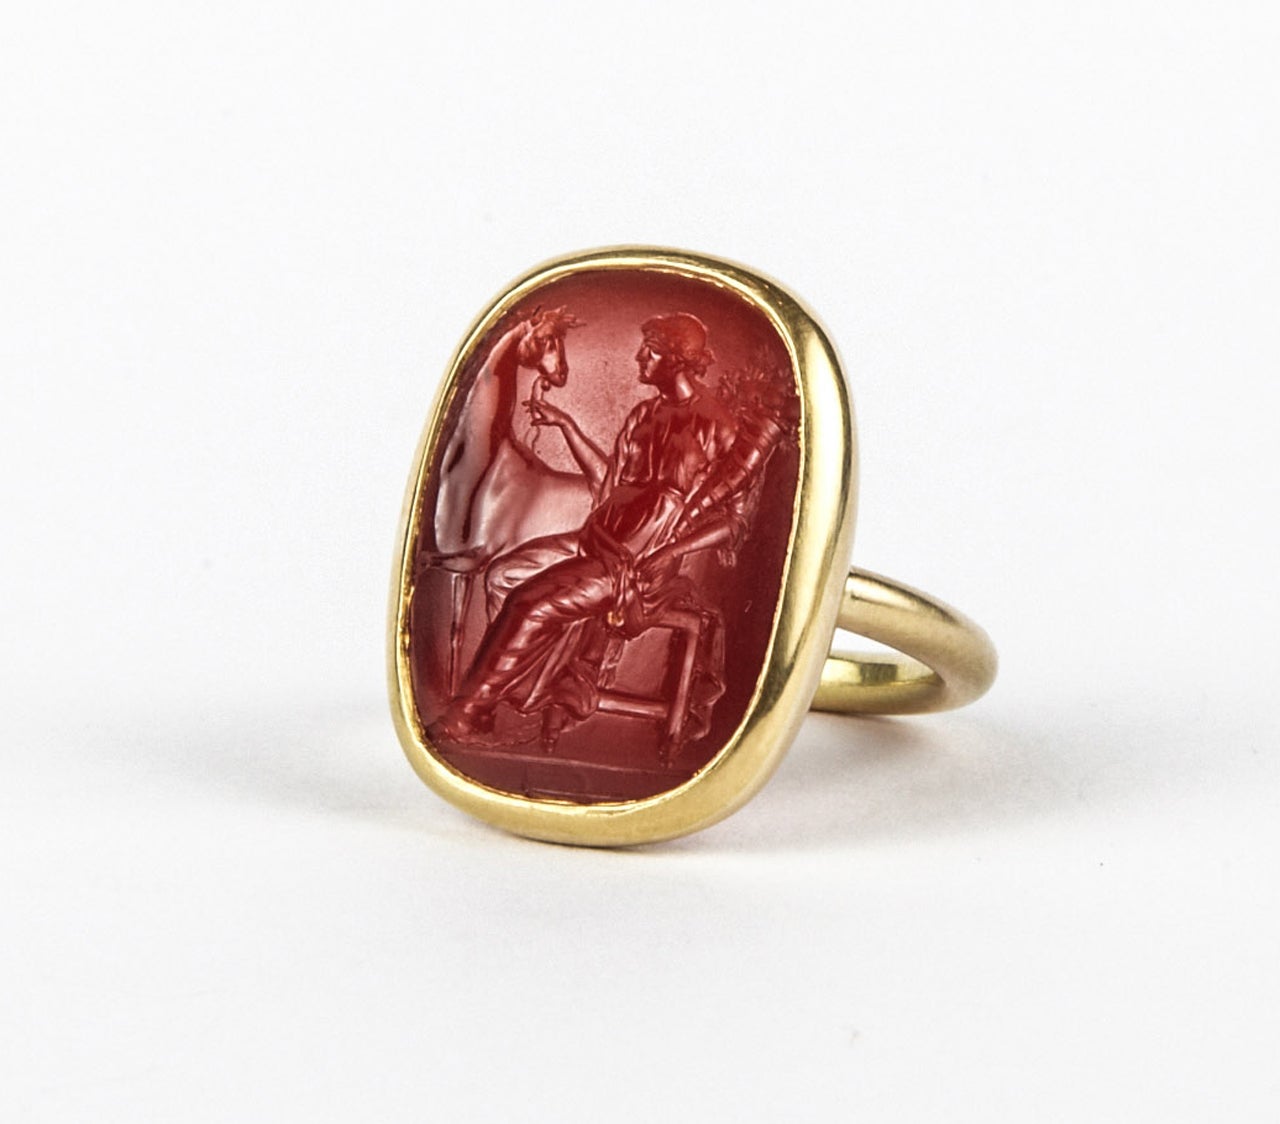 Contemporary Antique Carnelian Intaglio and its Impression Rings